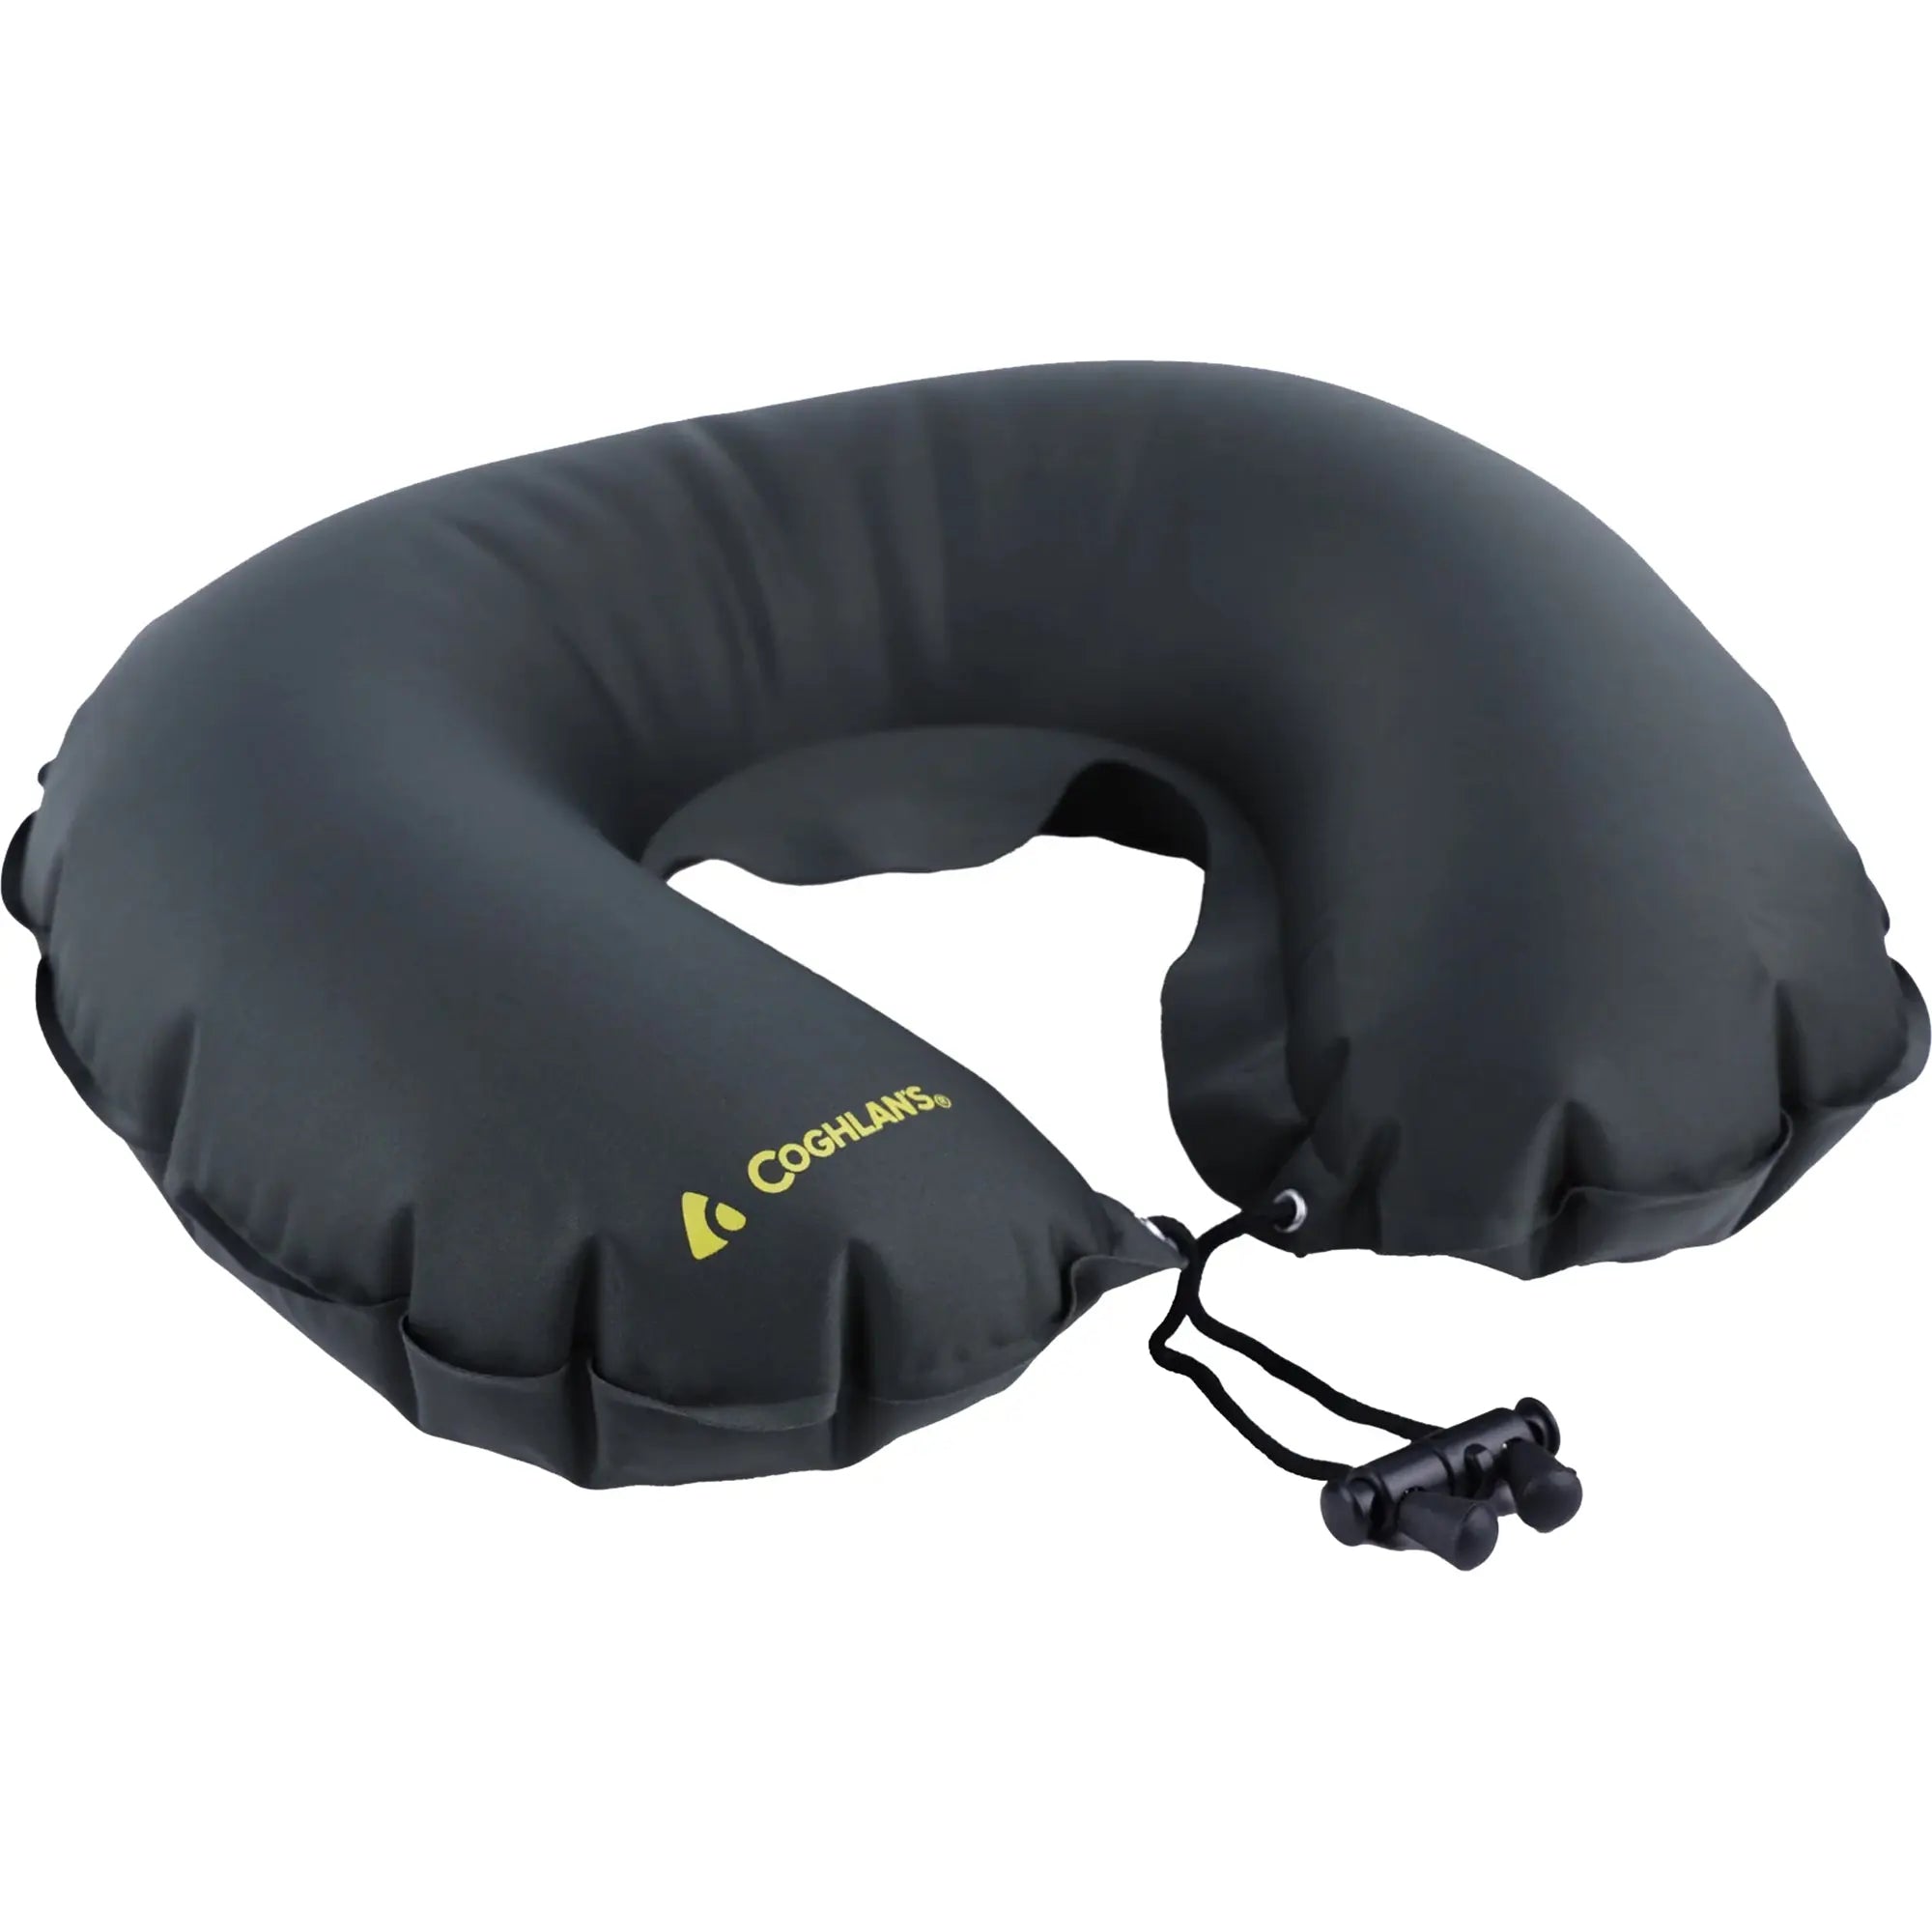 Coghlan's Inflatable Neck Pillow with Storage Pouch Coghlan's